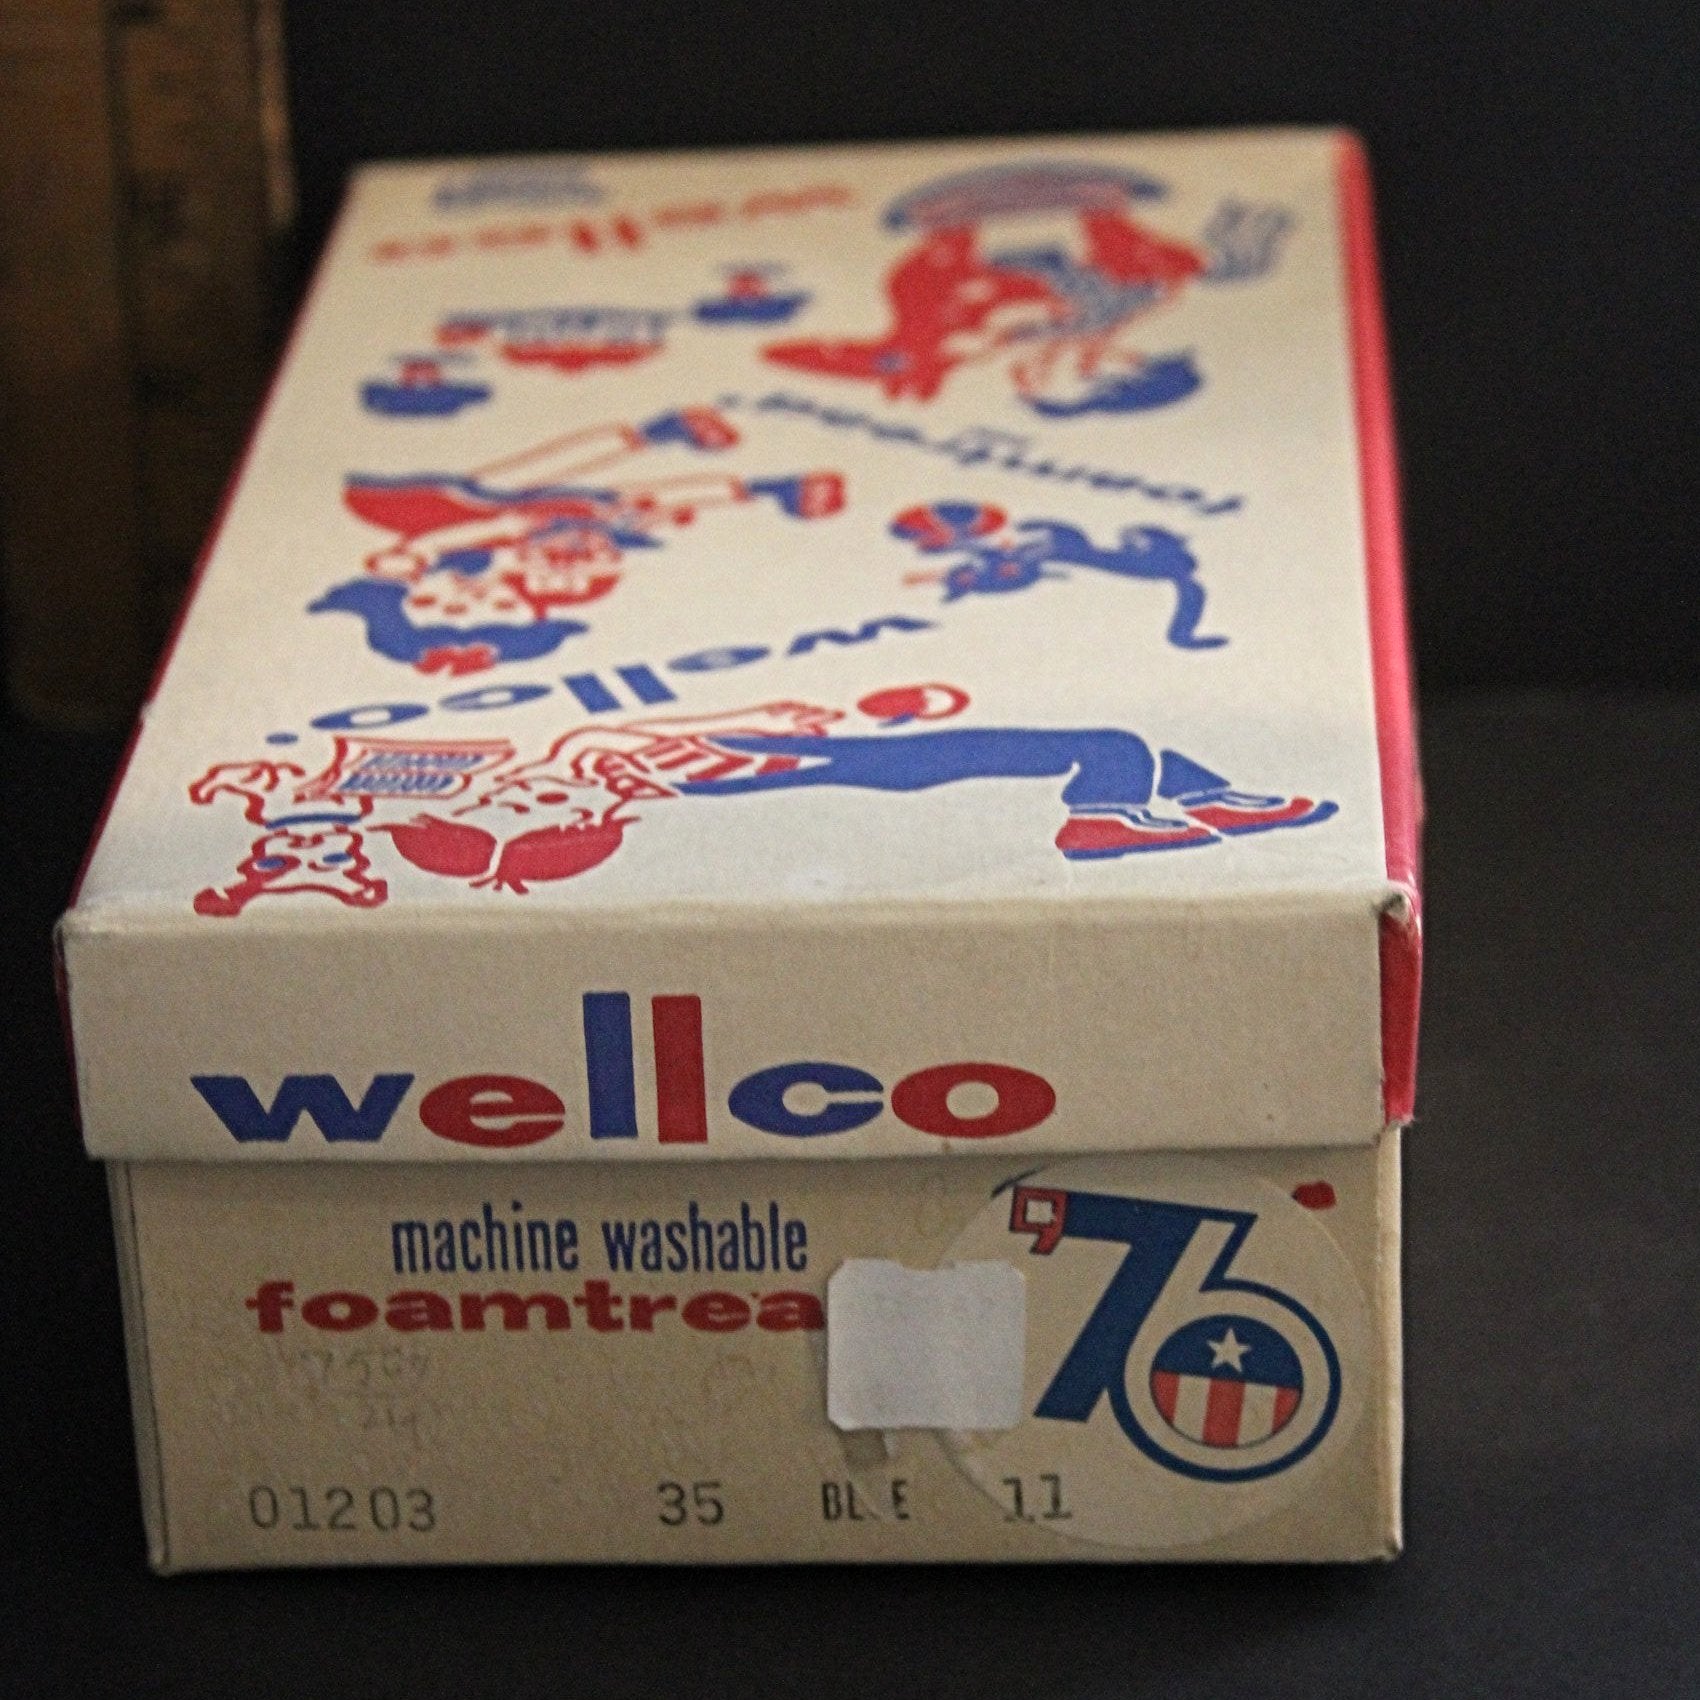 WELLCO FOAMTREADS '76 BICENTENNIAL Stars and Stripes Corduroy Slippers New Old Stock with Box